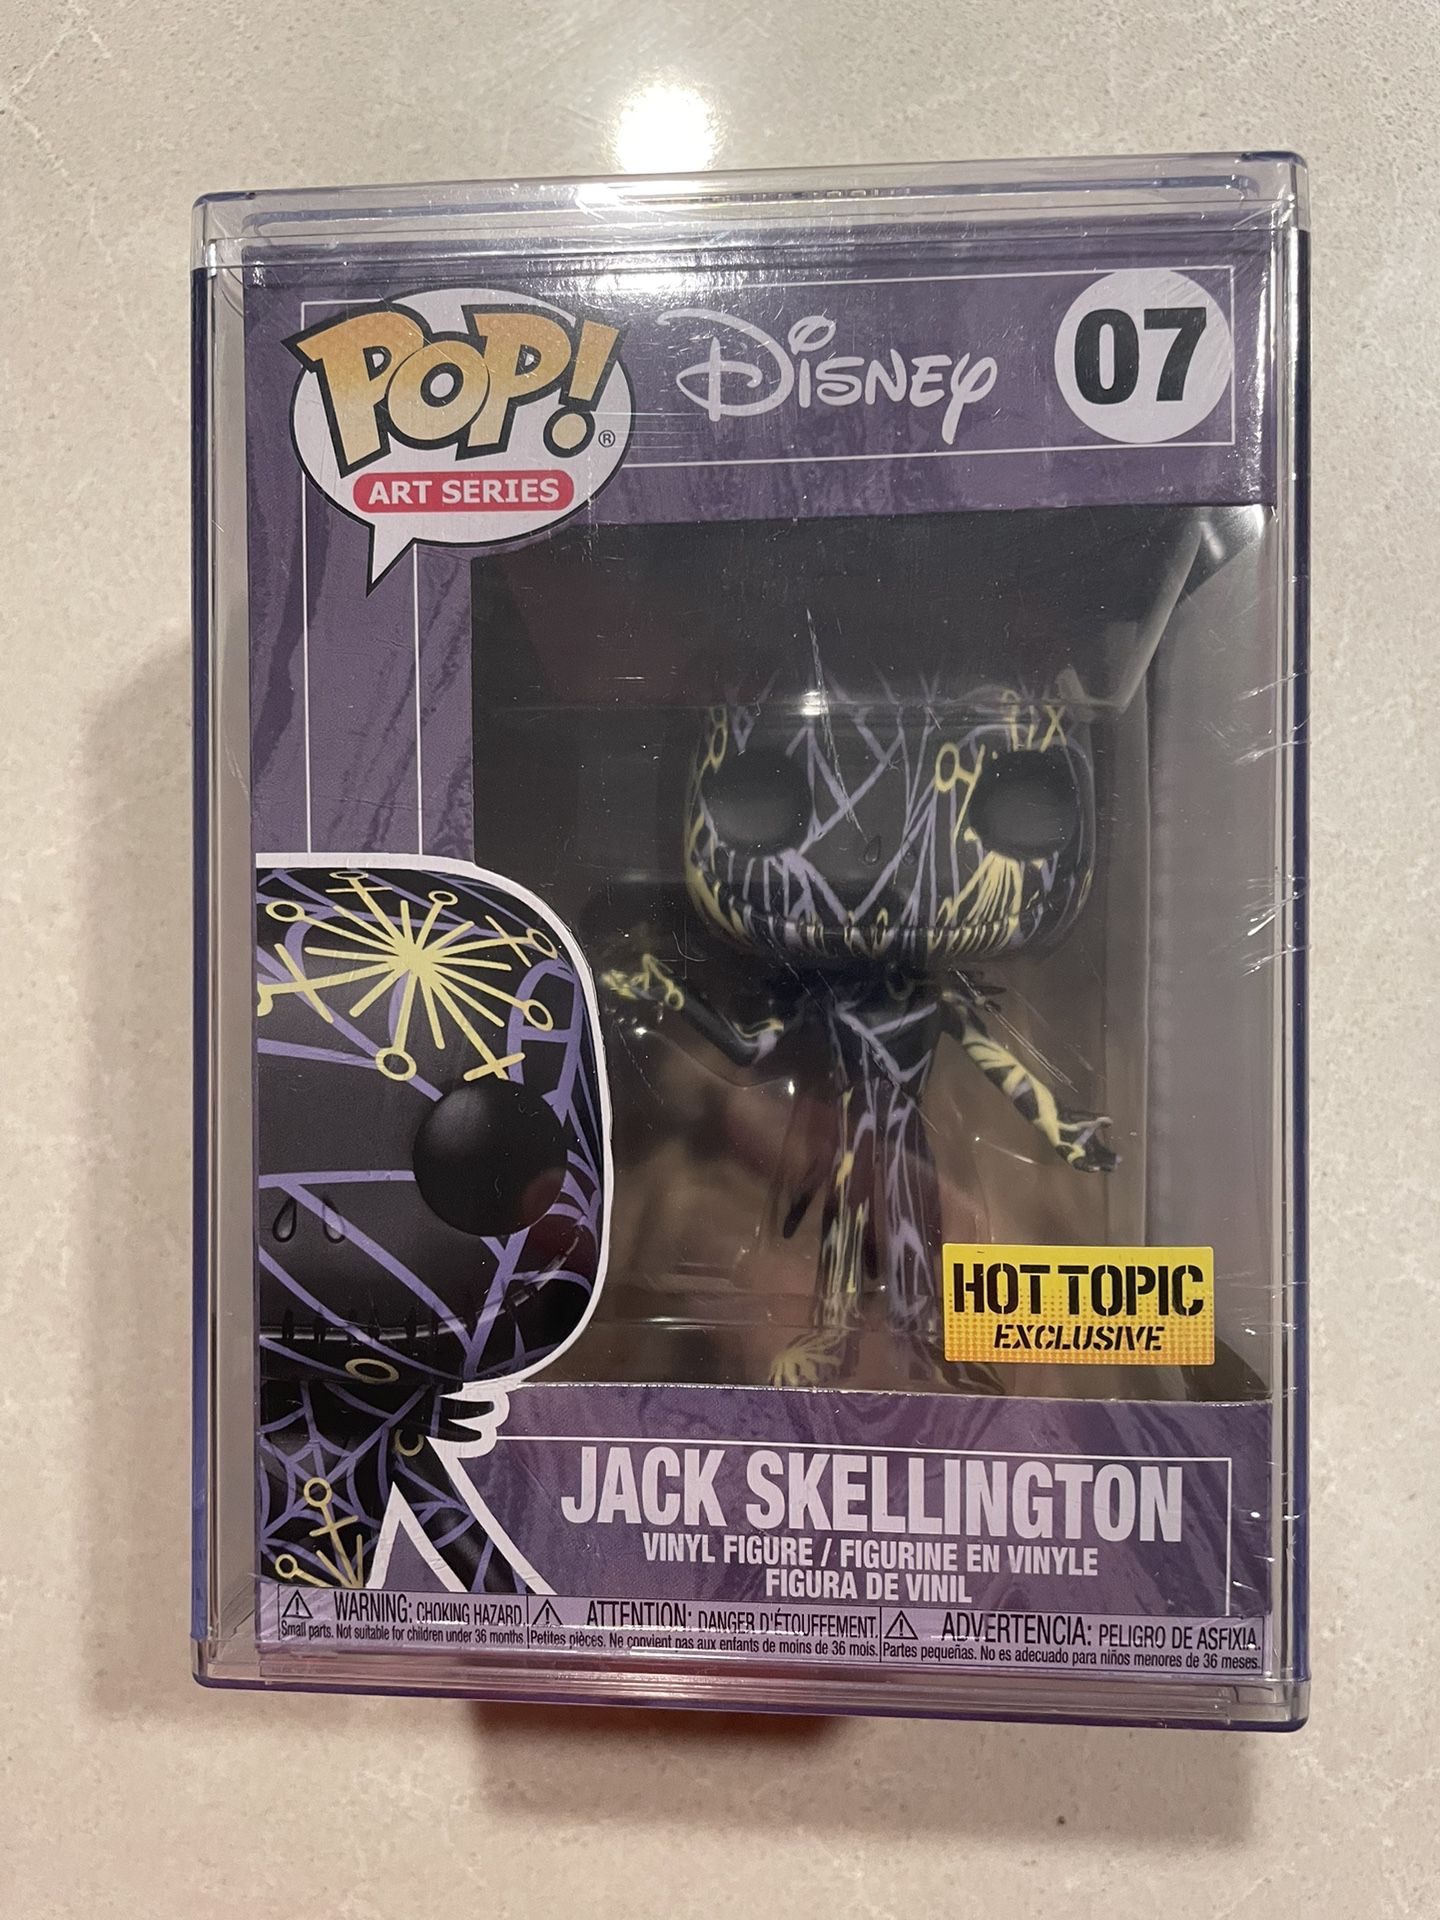 Jack Skellington Art Series Funko Pop *SEALED MINT* Hot Topic Exclusive Disney Nightmare Before Christmas NBC 07 with Hard Stack protector